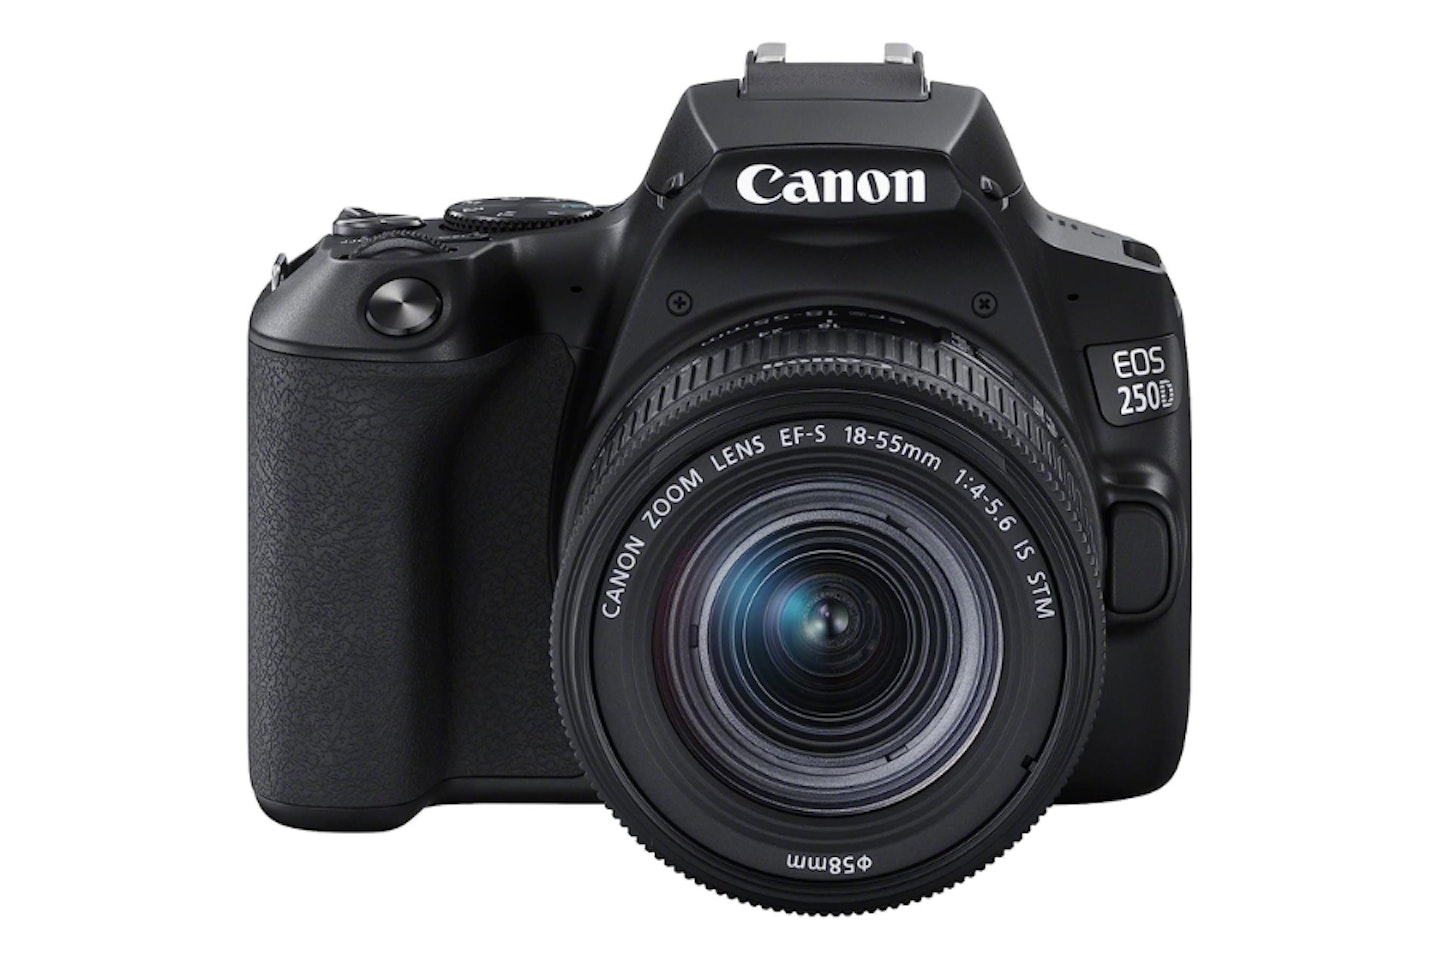 Canon EOS 250D - one of the best entry-level cameras